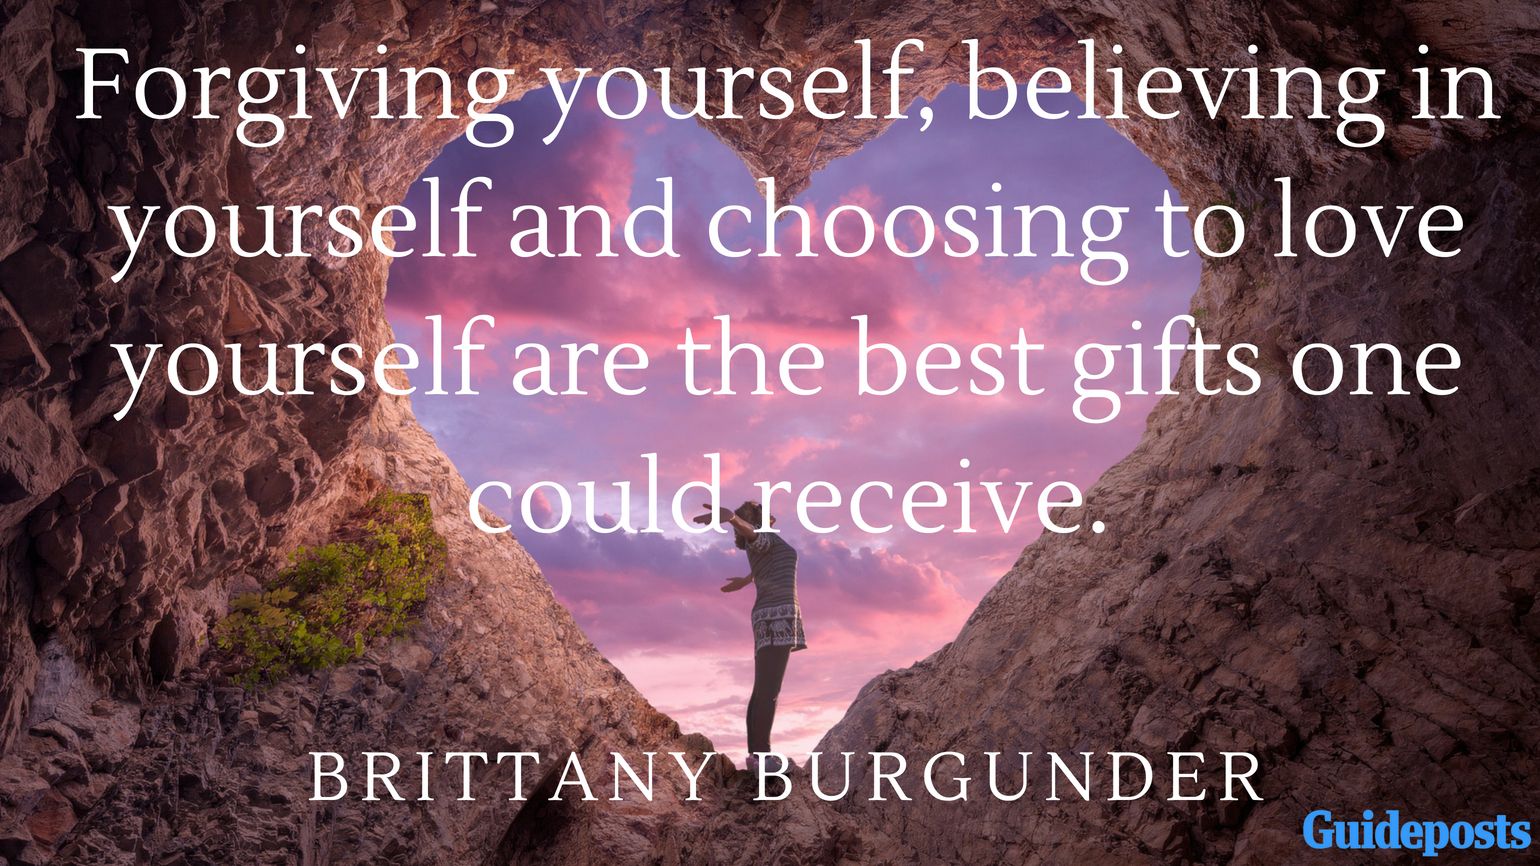 Forgiving yourself, believing in yourself and choosing to love yourself are the best gifts one could receive.”  ― Brittany Burgunder